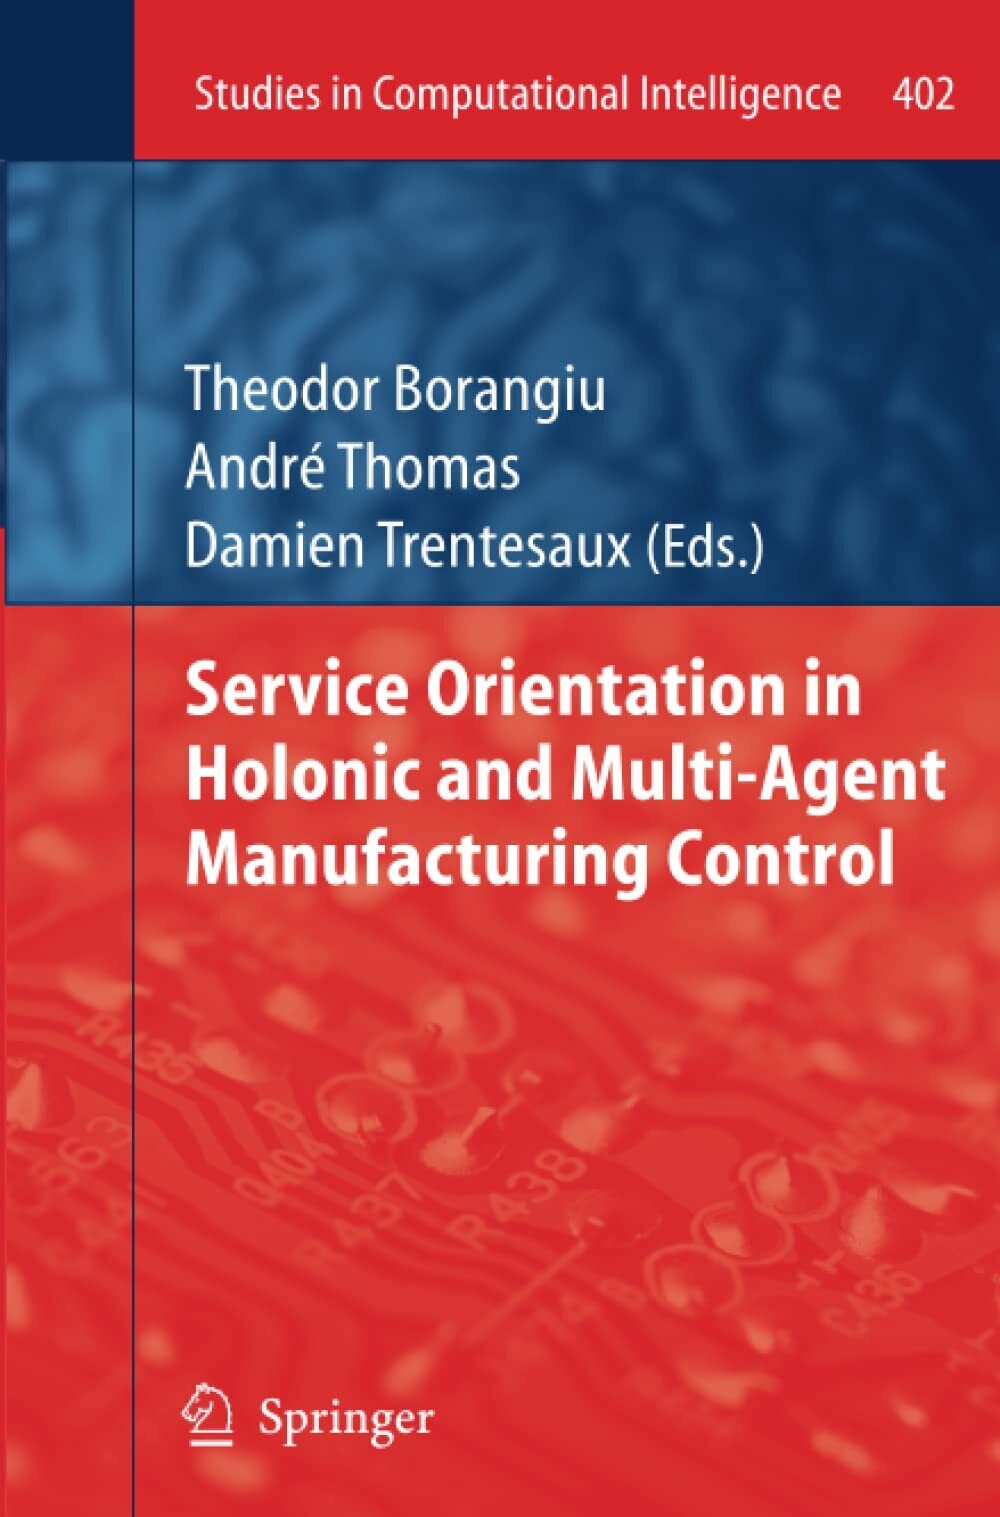 Service Orientation in Holonic and Multi-Agent Manufacturing Control - 2014